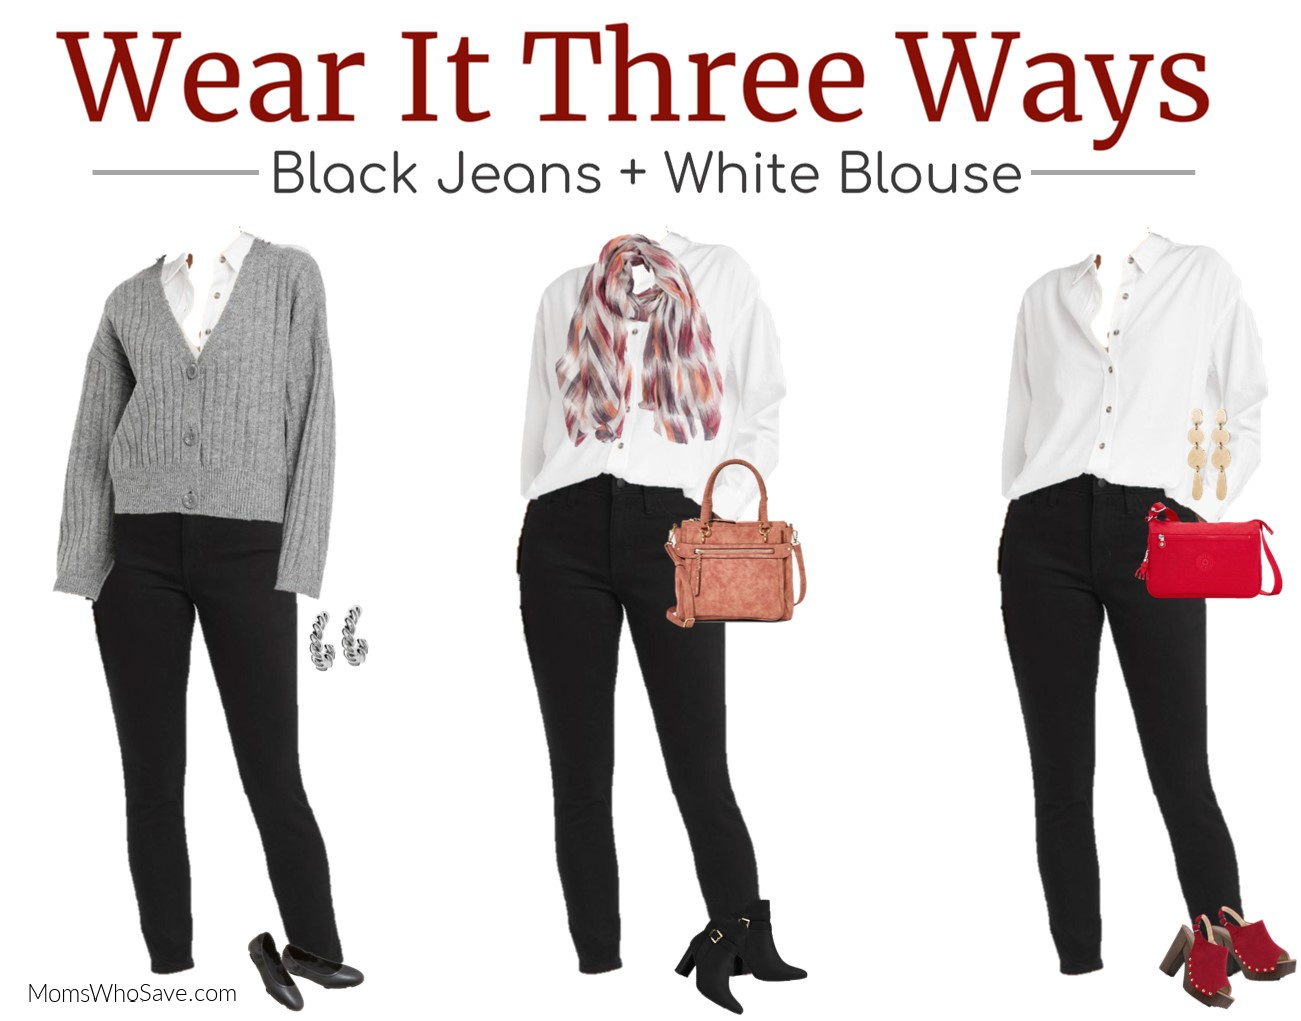 5 Outfits With Black Jeans for Spring — Casual to Dressy Casual  Black  pants outfit, Jeans outfit women, Black jeans outfit spring